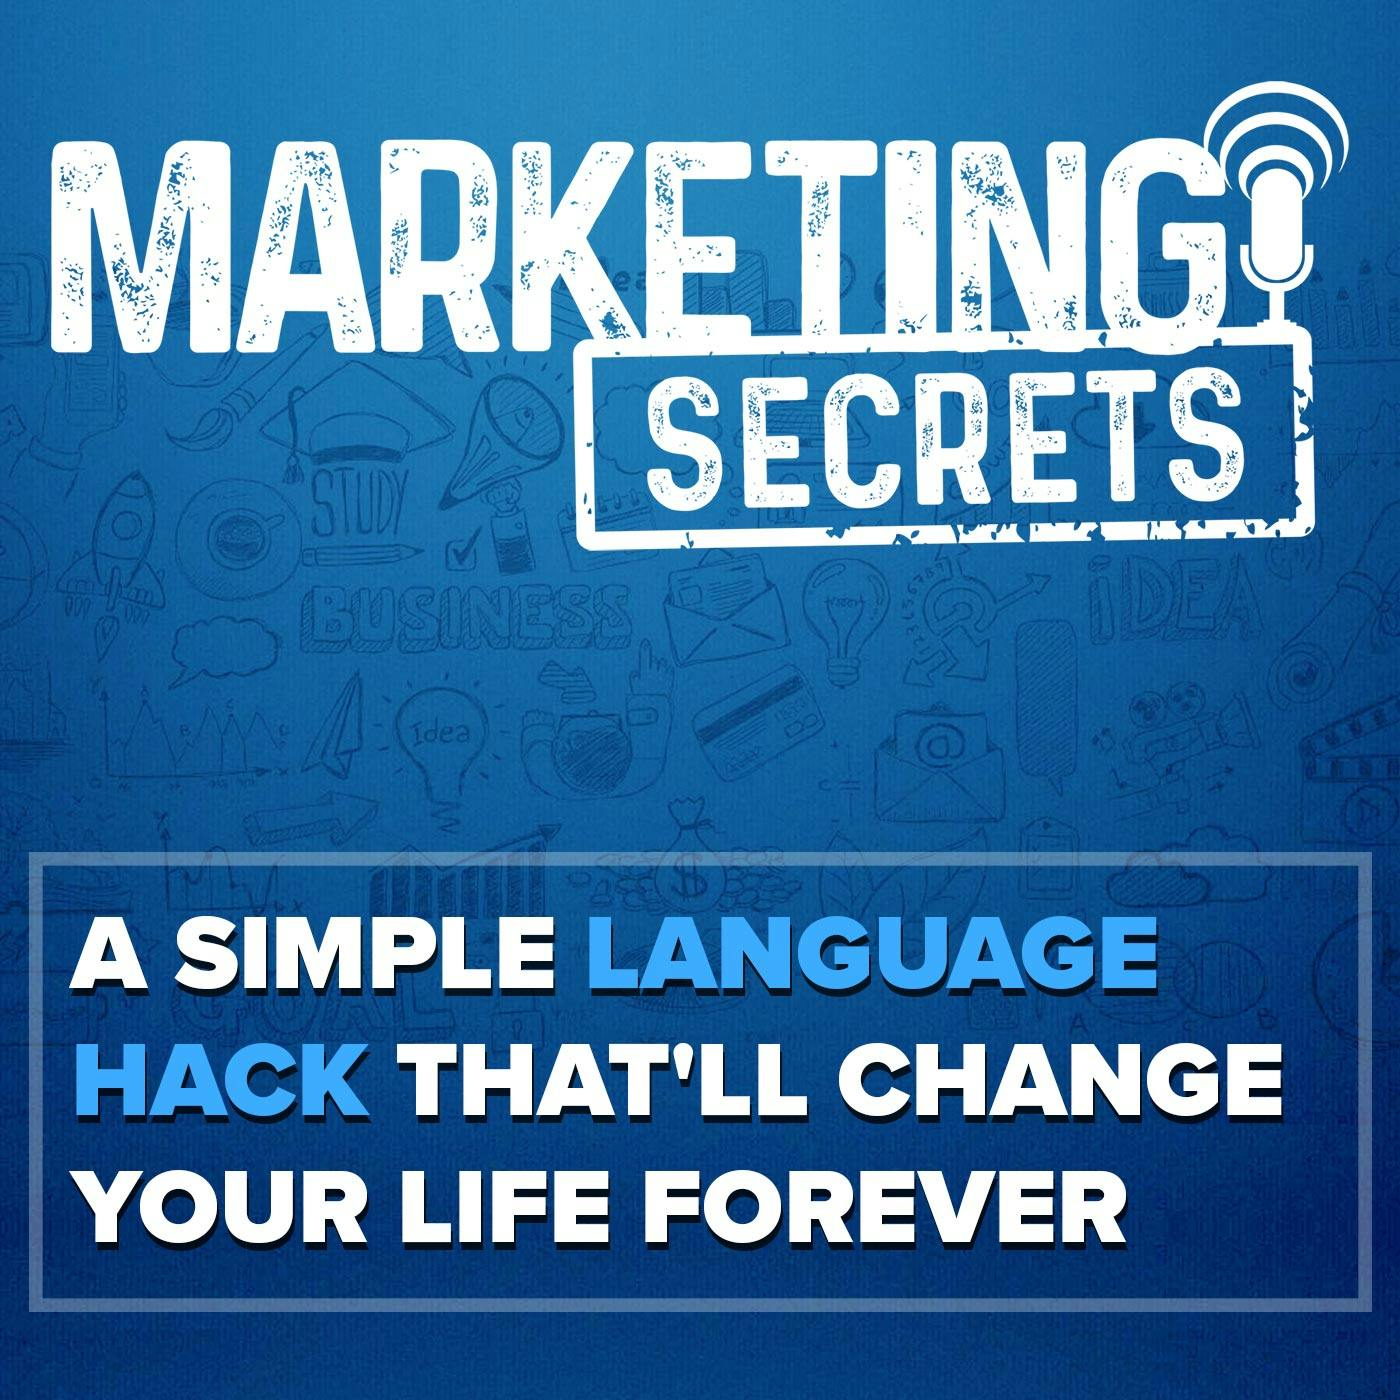 A Simple Language Hack That'll Change Your Life Forever